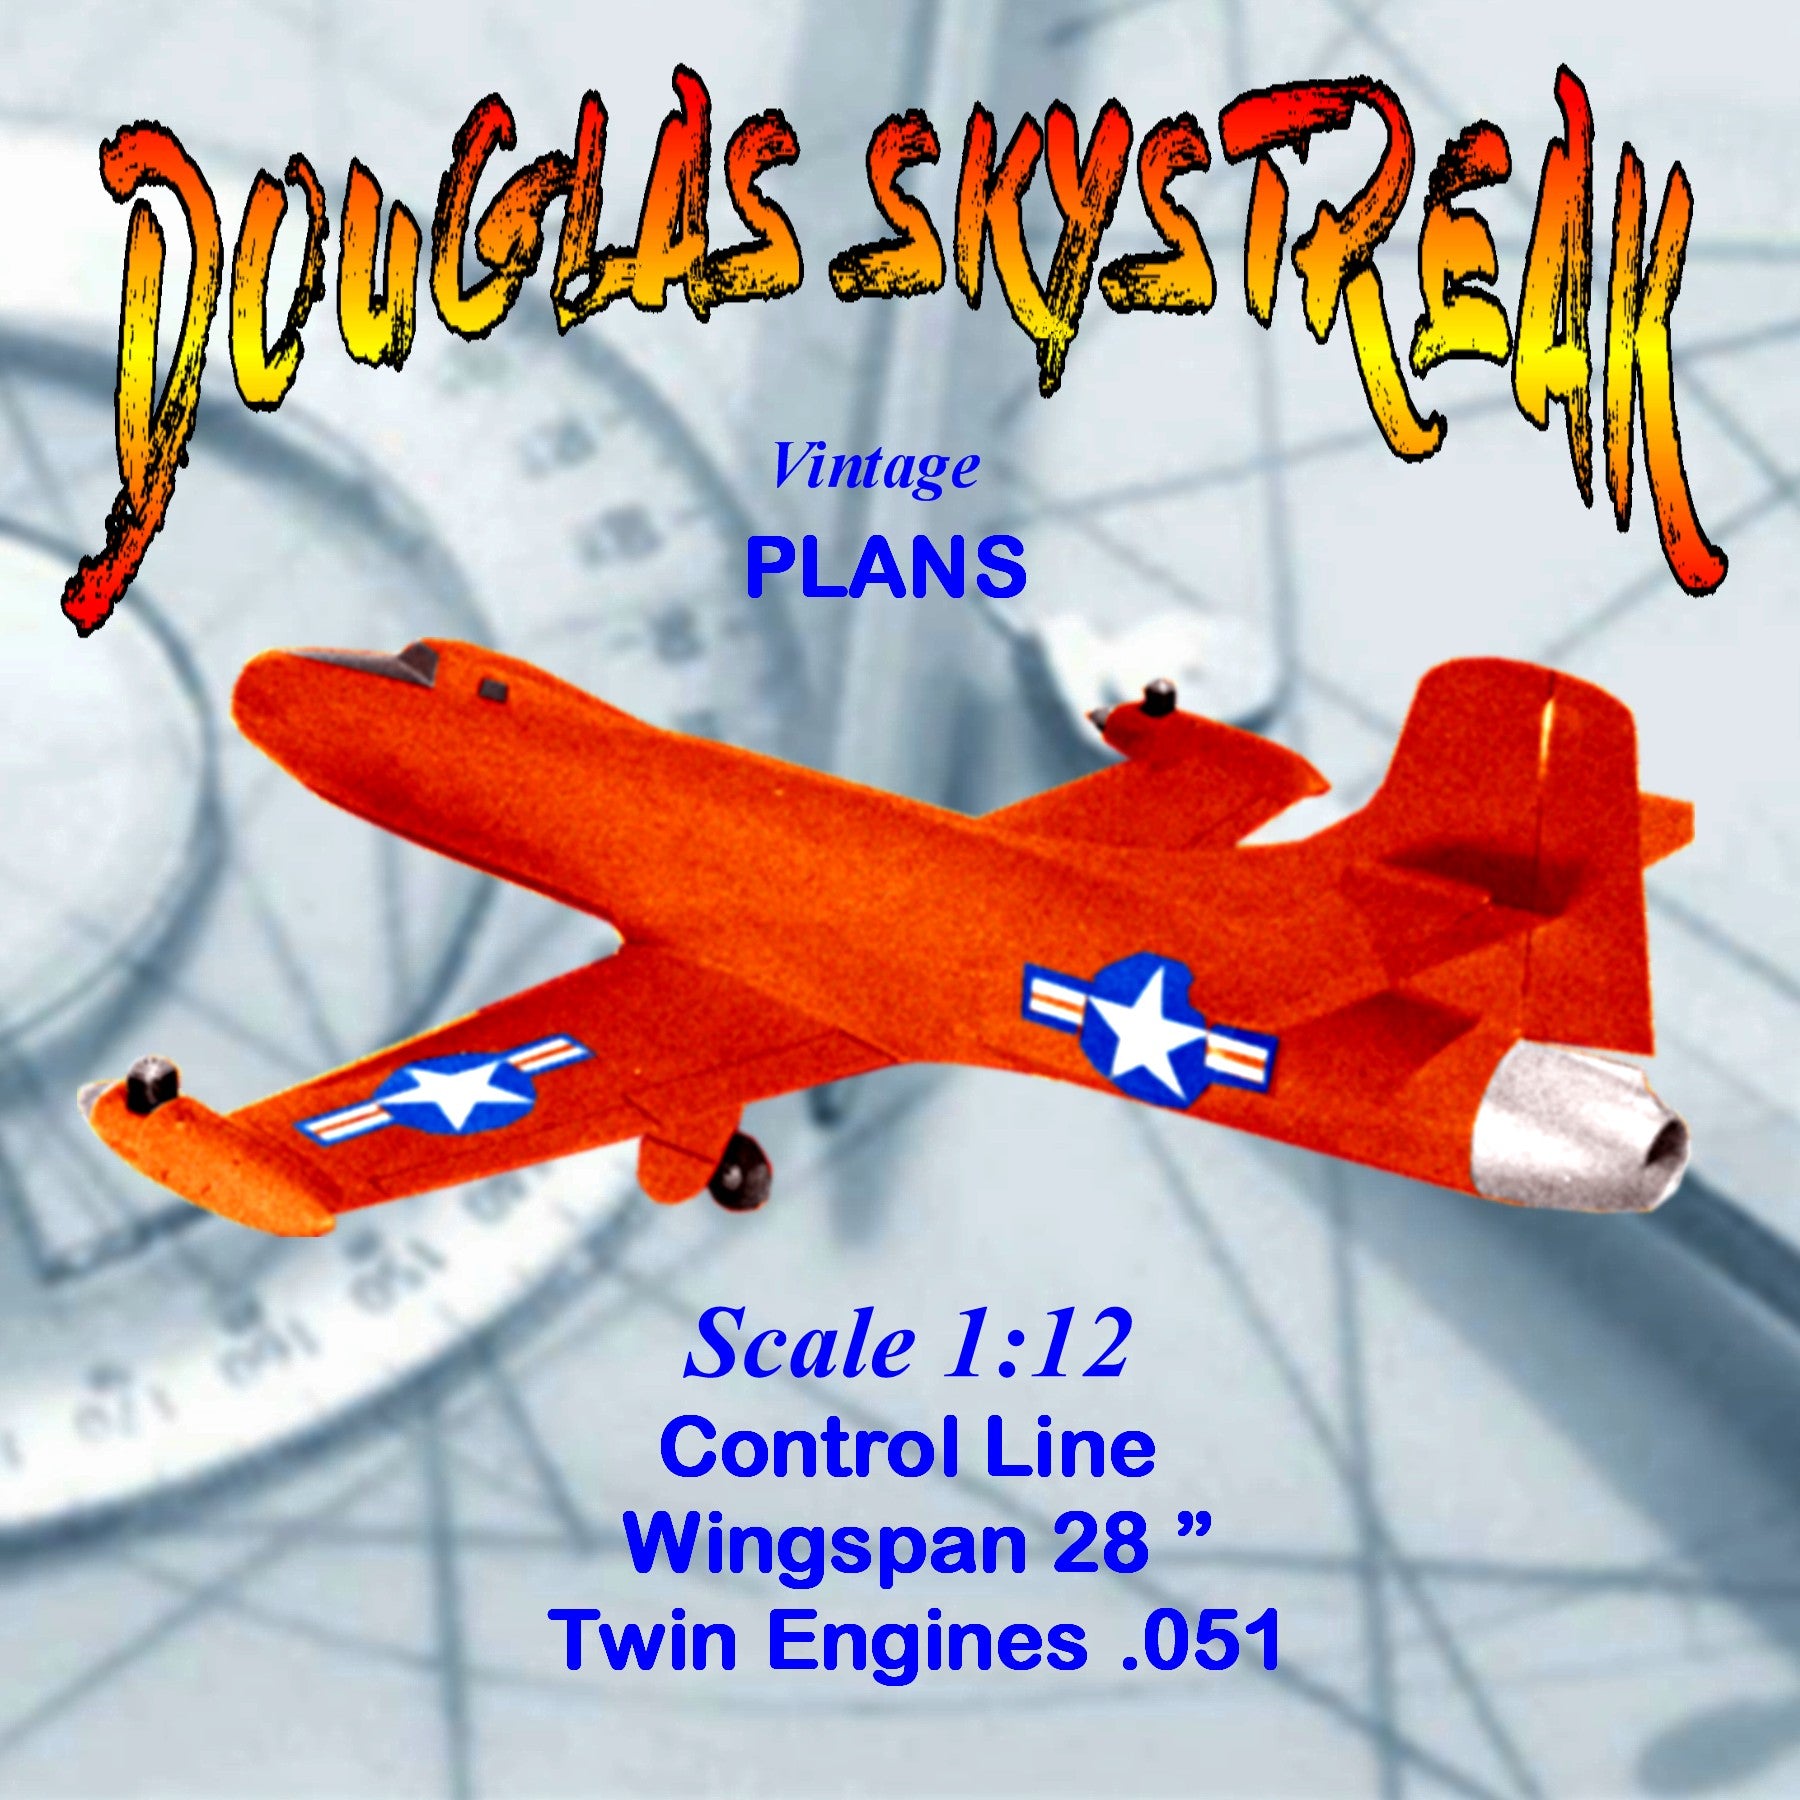 full size printed plans scale 1:12 control line douglas skystreak construction is conventional